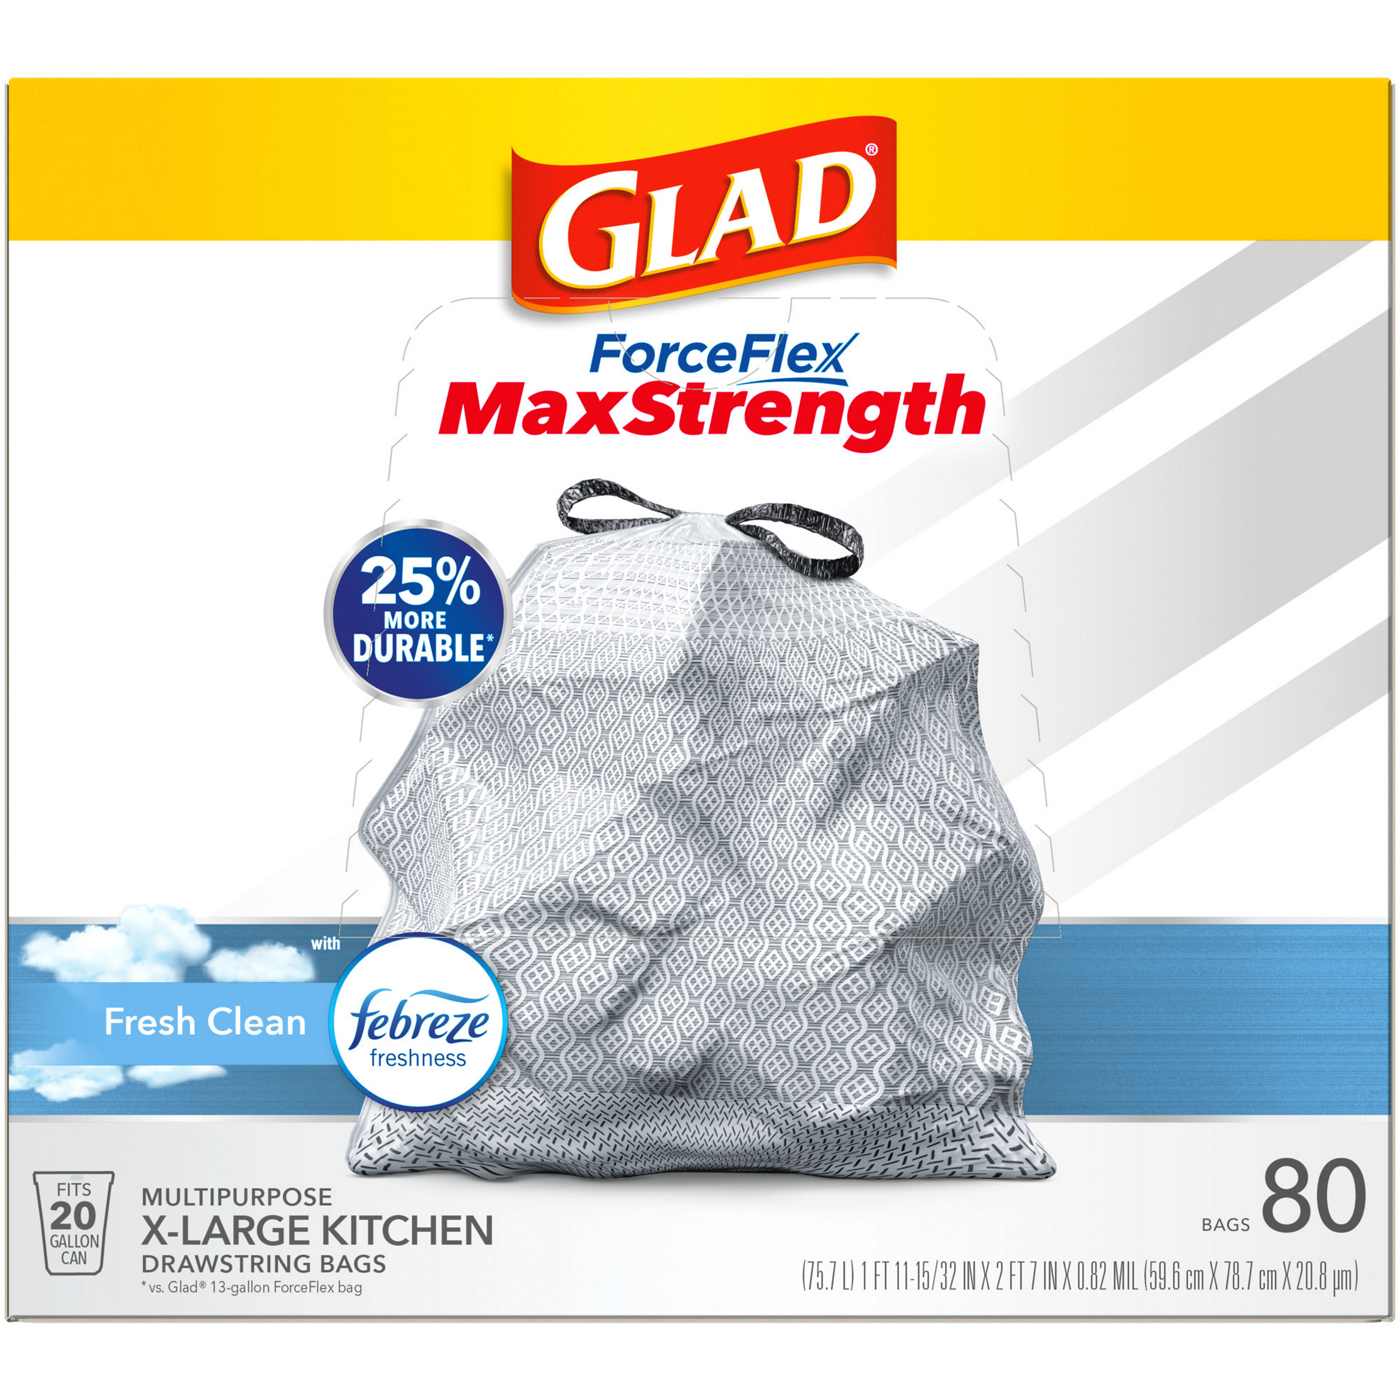 Glad ForceFlex MaxStrength X-Large Kitchen Drawstring Trash Bags, 20 Gallon - Fresh Clean Scent with Febreze Freshness; image 8 of 9